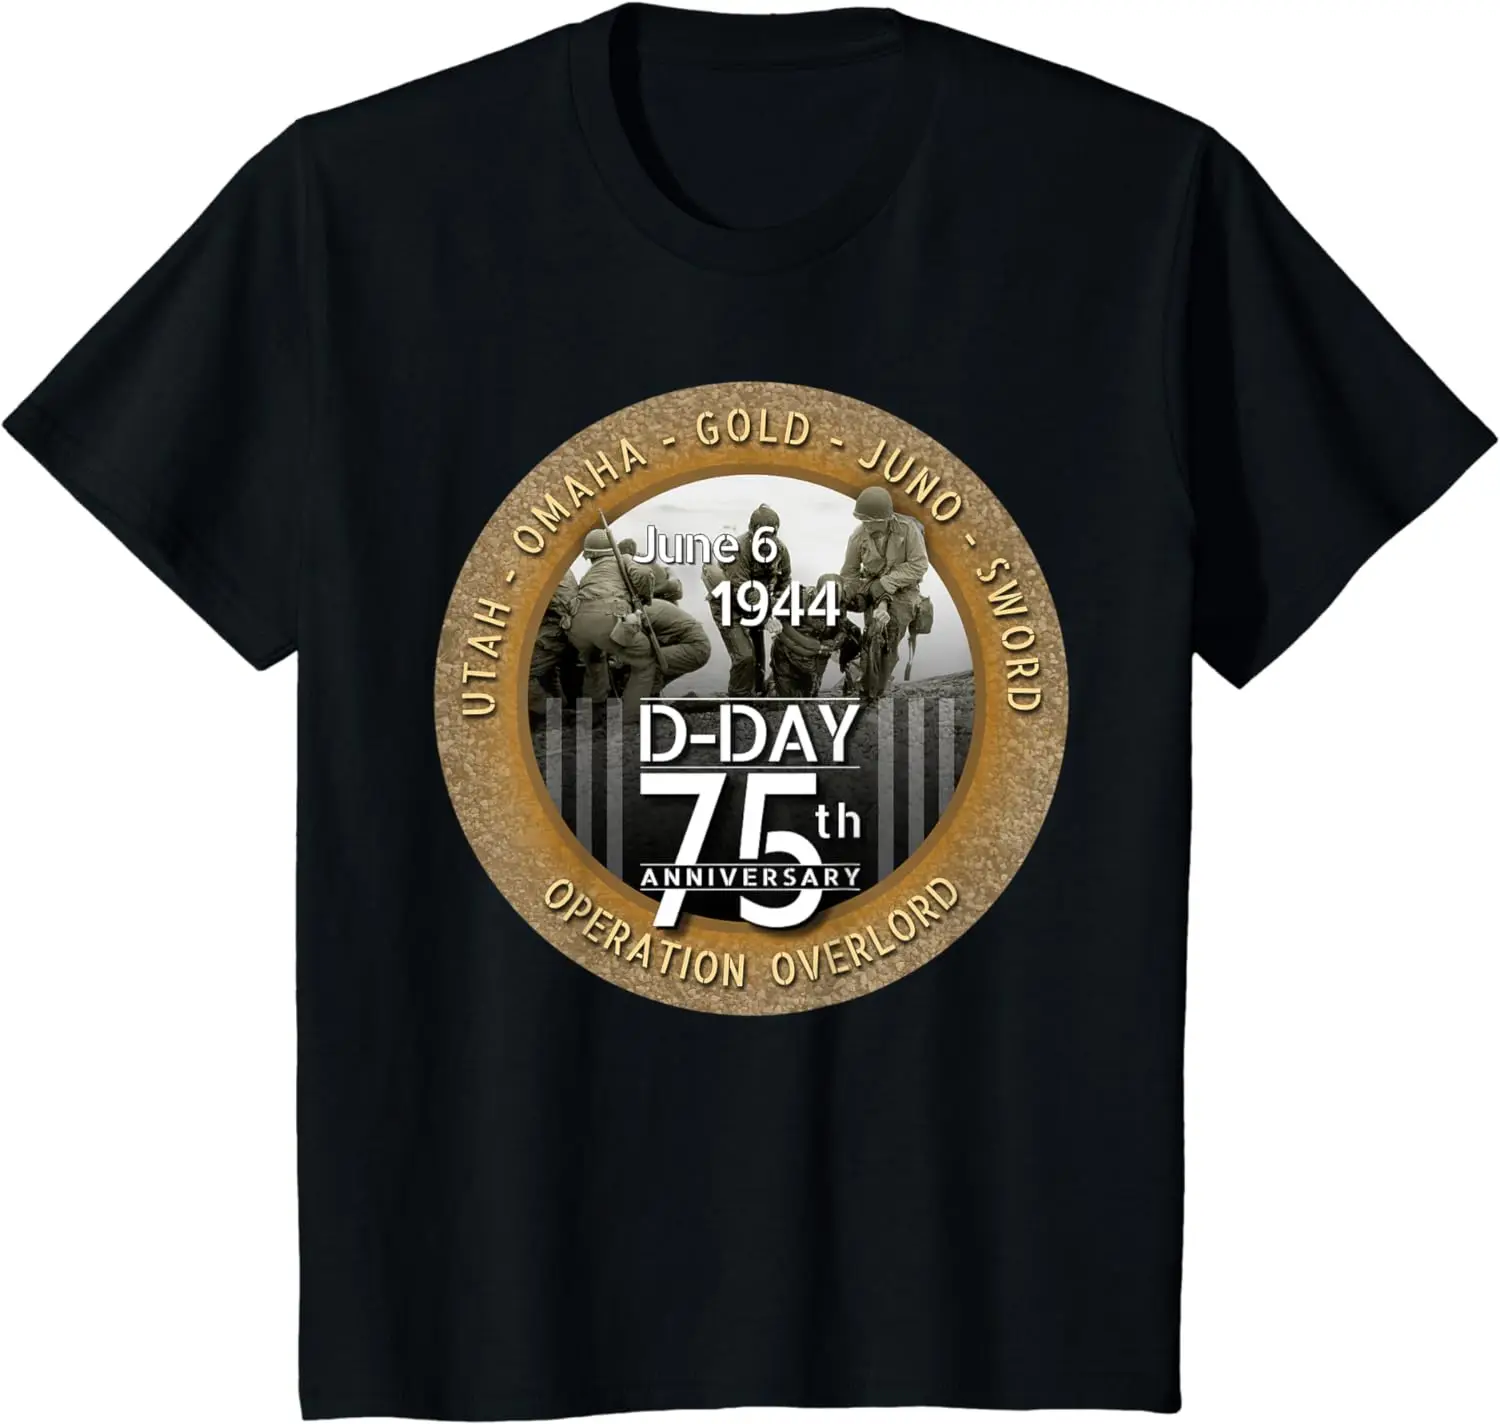 

WWII D-Day 75th Anniversary Utah Beach Rescue T-Shirt 100% Cotton O-Neck Summer Short Sleeve Casual Mens T-shirt Size S-3XL